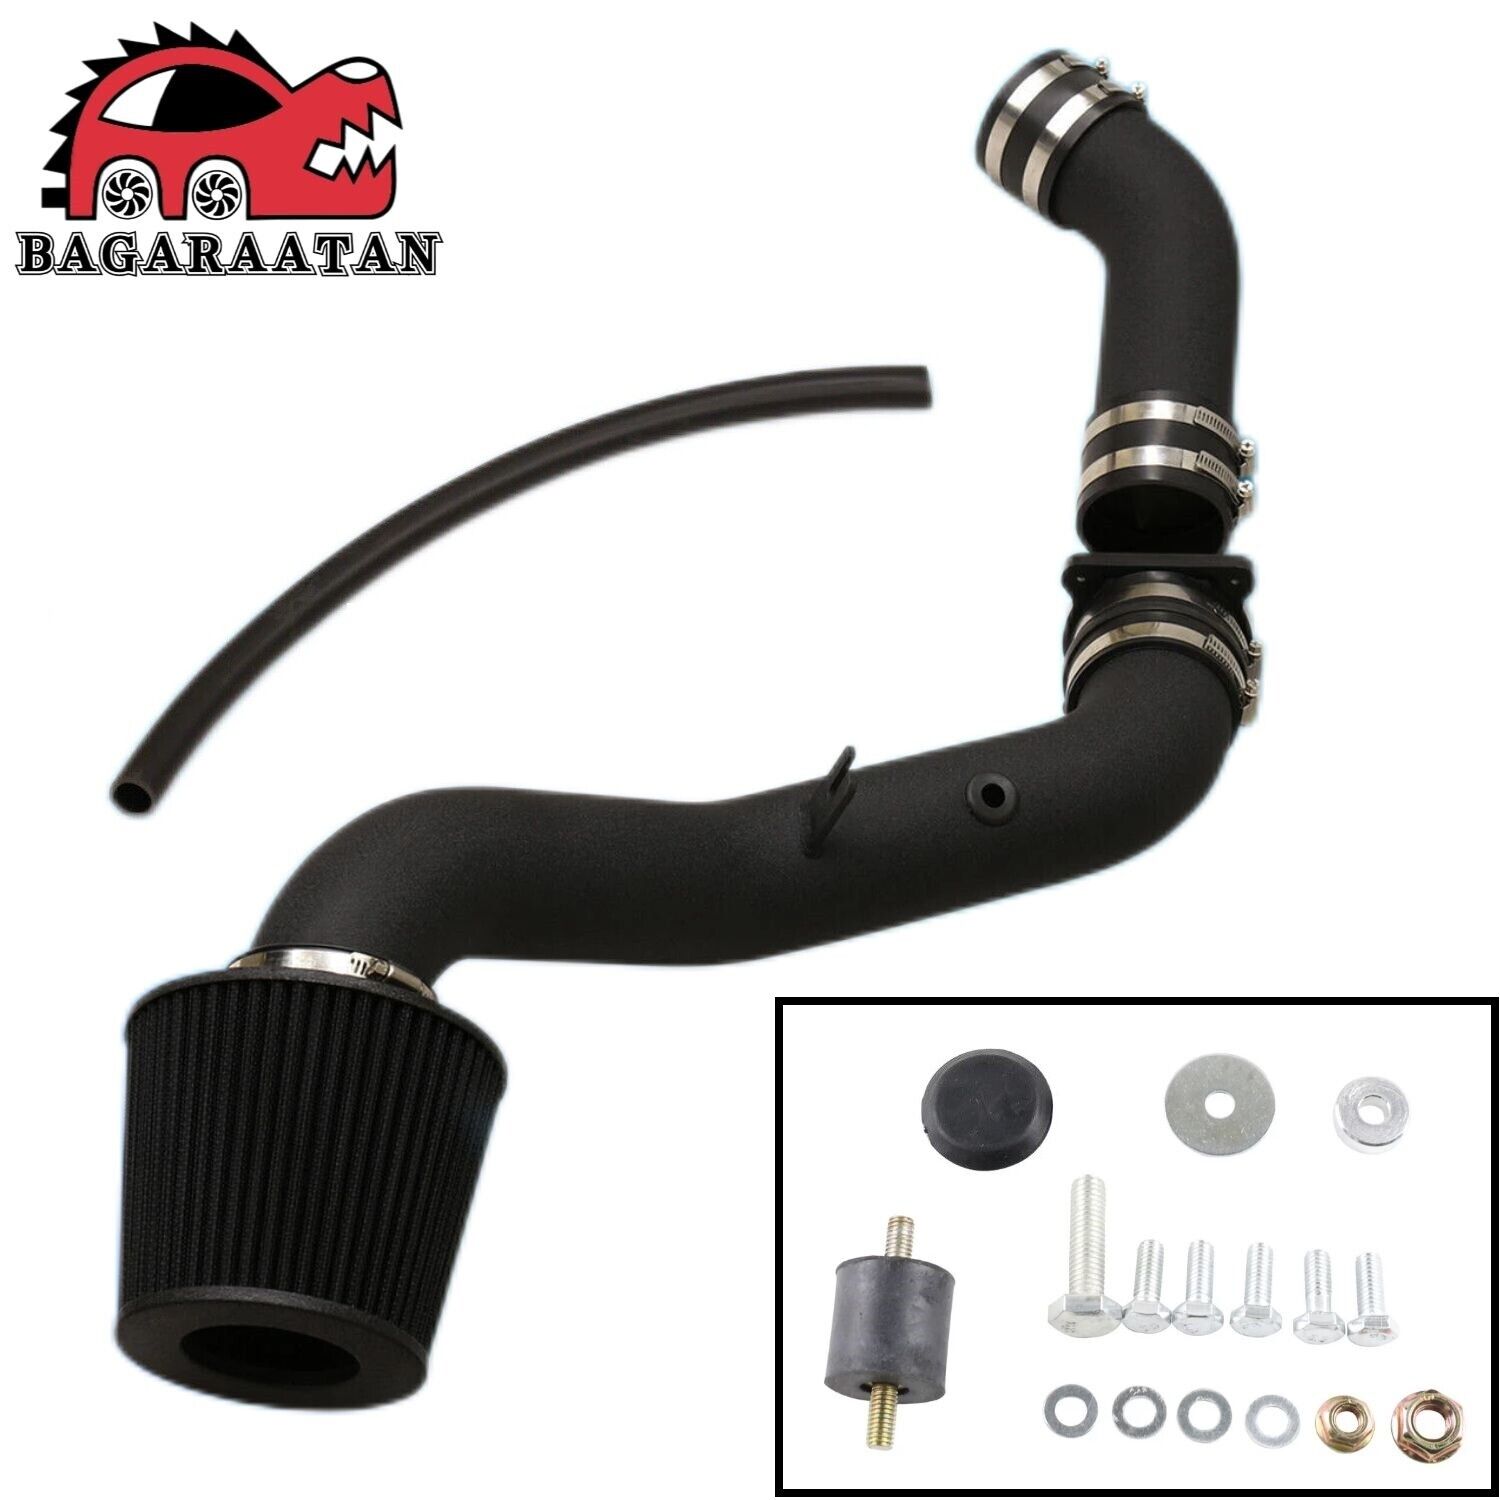 Black Cold Air Intake Induction Pipe w/ Filter for Nissan 350Z Infiniti G35 V35